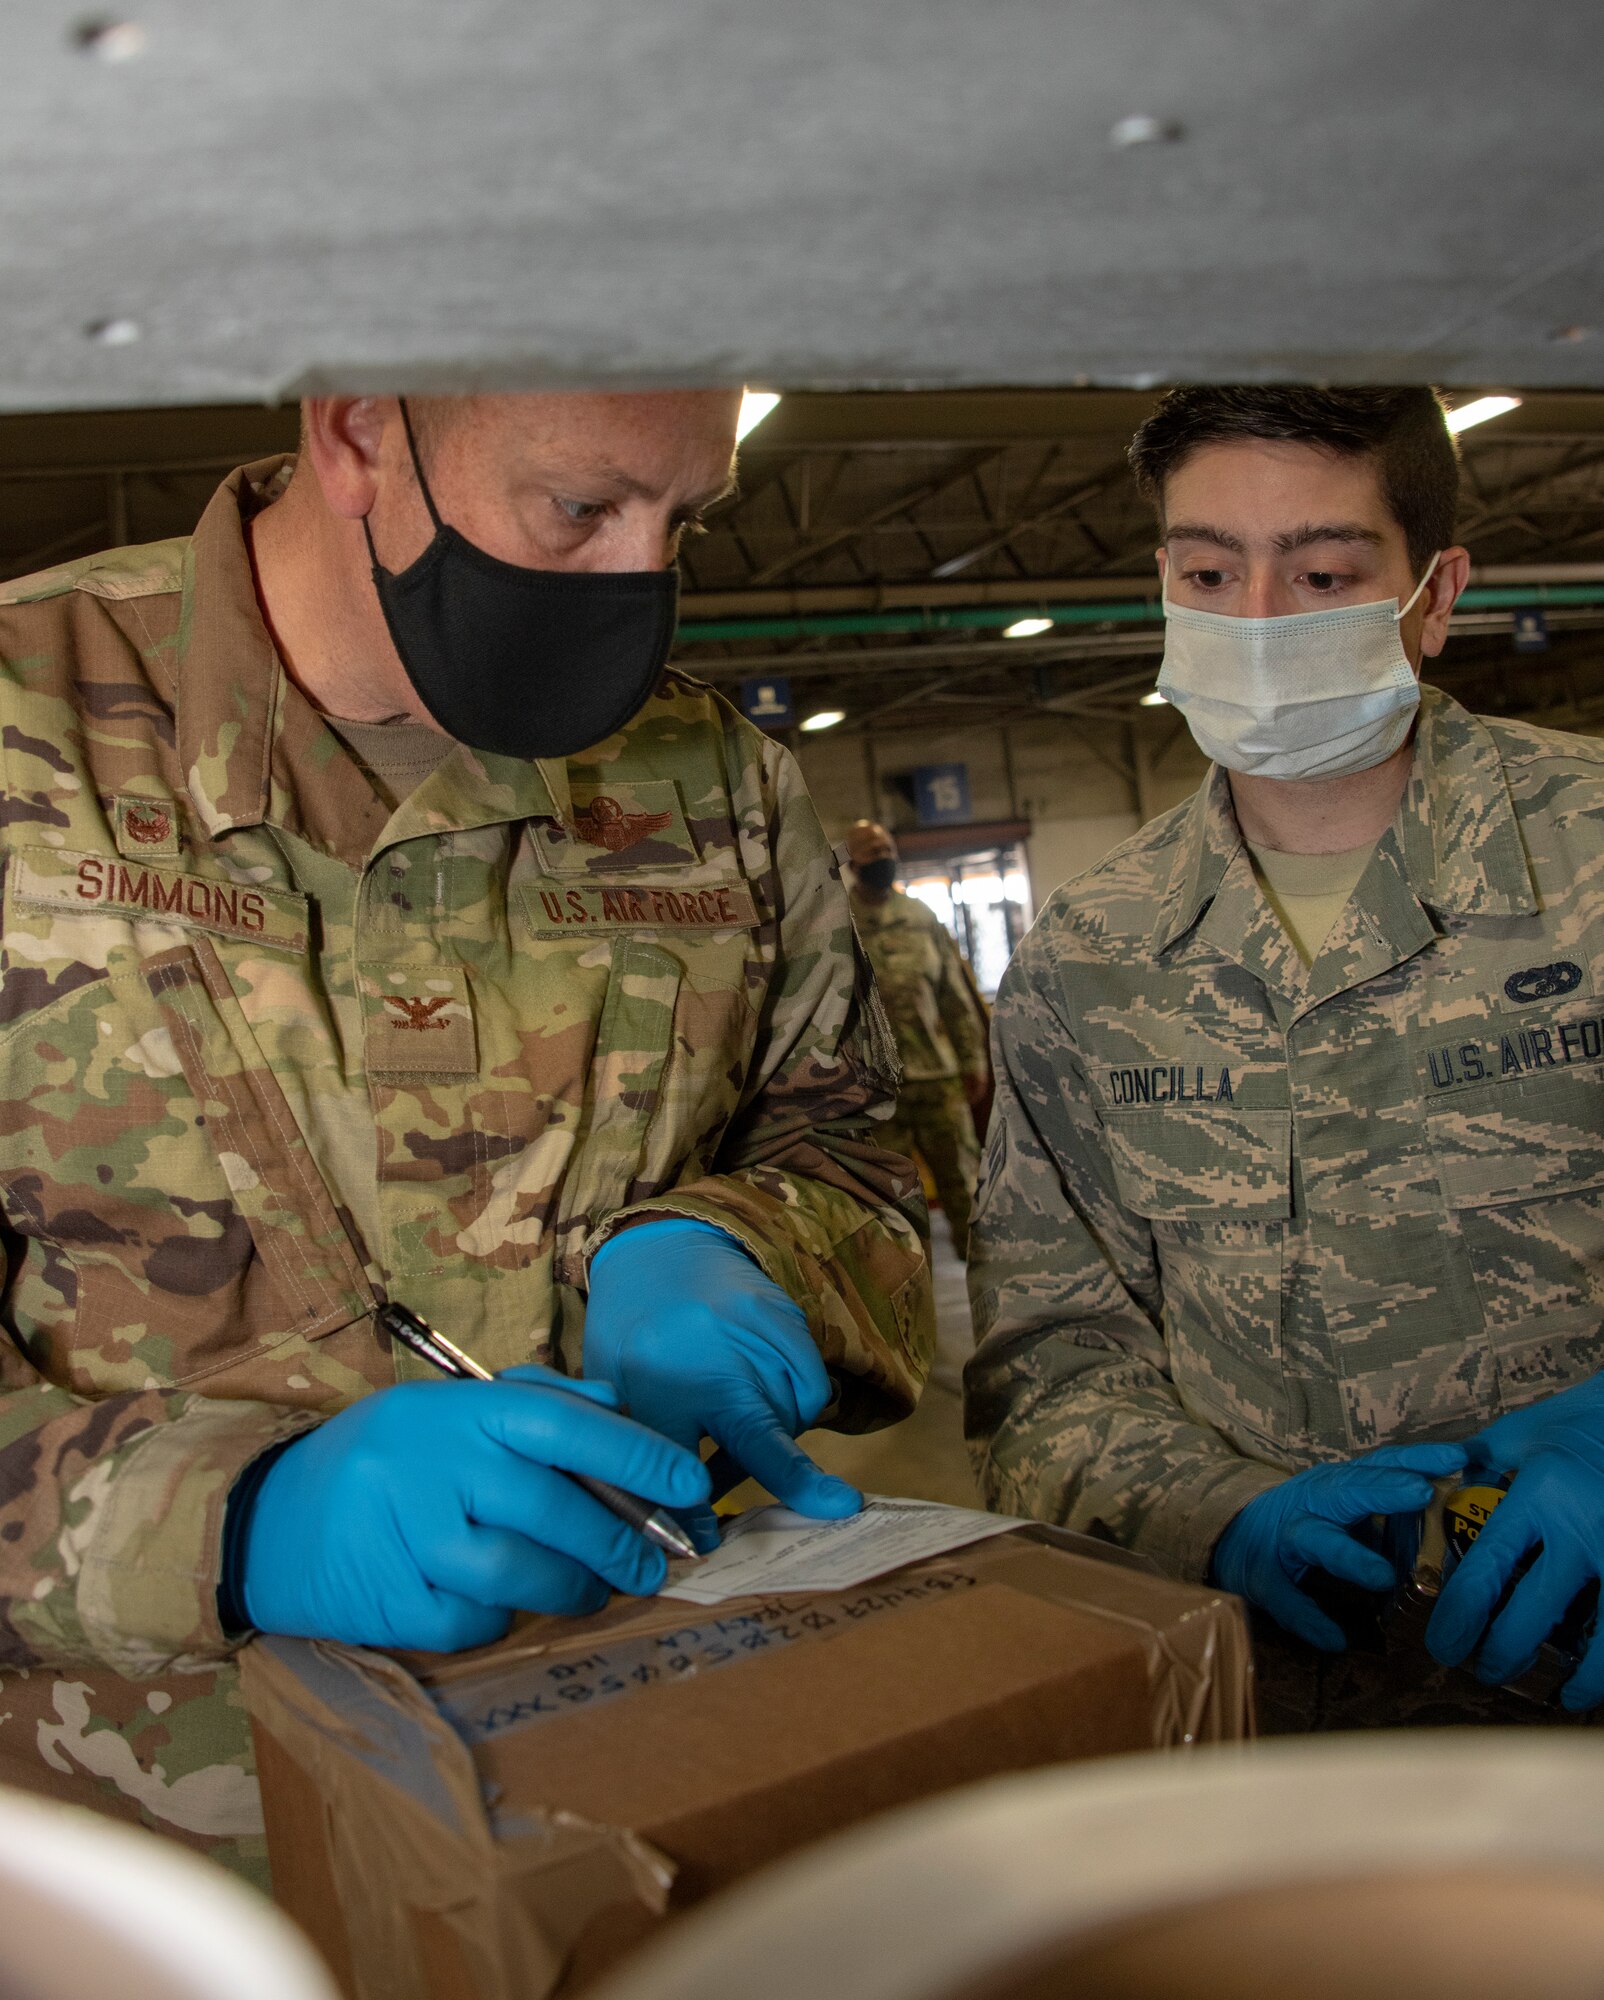 From left, U.S. Air Force Col. Corey Simmons, 60th Air Mobility Wing commander, Airman 1st Class Gregory Concilla, 60th Aerial Port Squadron packing and crating technician, Chief Master Sgt. Robert Schultz, 60th AMW command chief, and A1C Yaser Belal, 60th APS packing and crating technician, participate in a packing and crating demonstration during Leadership Rounds July 24, 2020, at Travis Air Force Base, California. The 60th APS is the United States Transportation Command's primary west coast aerial port providing global and passenger distribution for the United States and its Allies. The Leadership Rounds program provides 60th AMW leadership an opportunity to interact with Airmen and get a detailed view of each mission performed at Travis AFB.  (U.S. Air Force photo by Heide Couch)